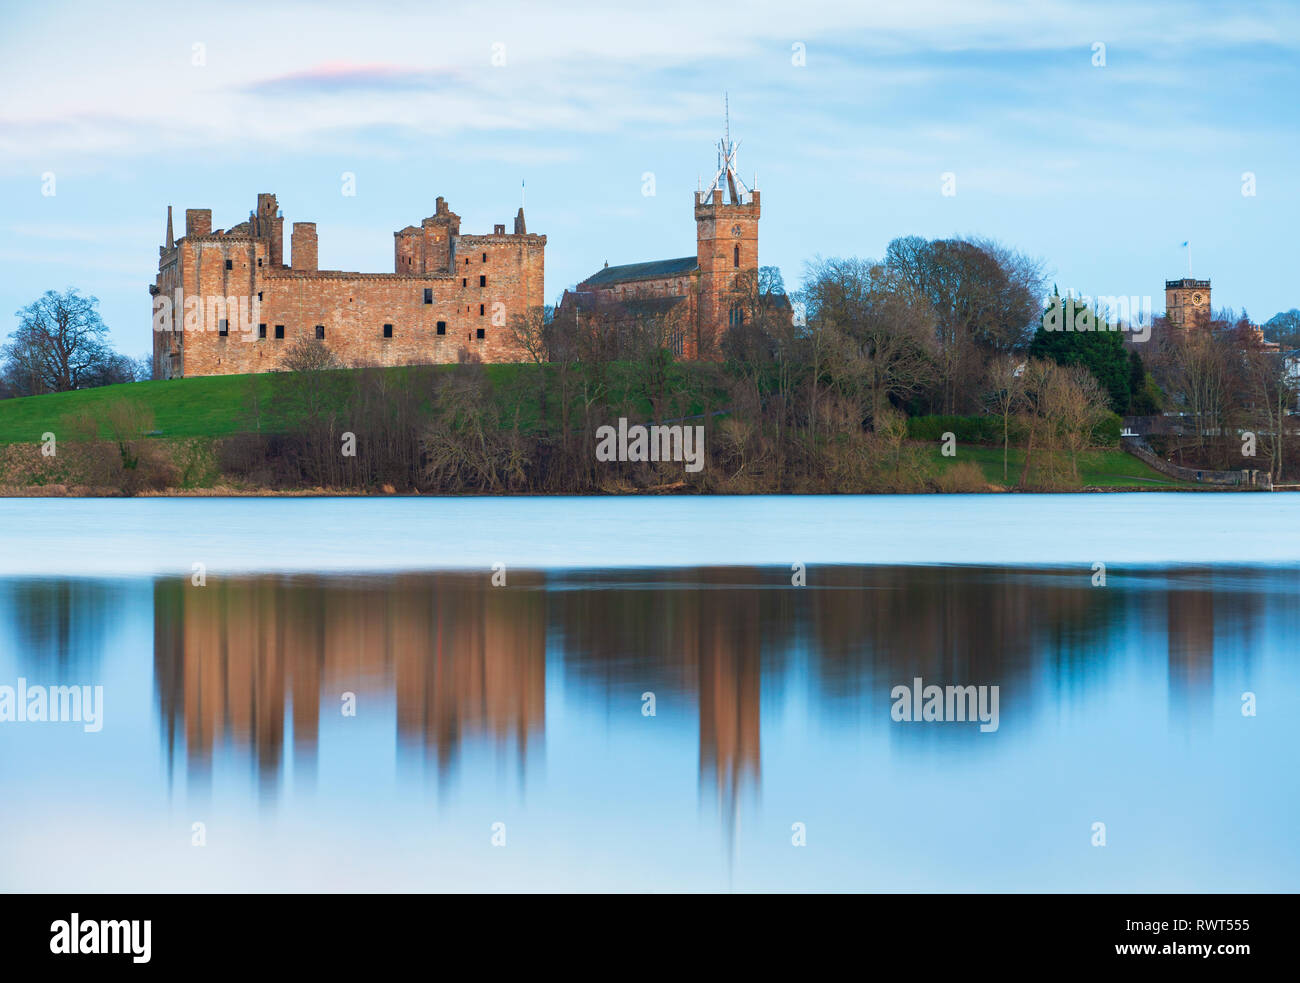 View of Linlithgow Palace in Linlithgow, West Lothian, Scotland, UK. Birthplace of Mary Queen of Scots. Stock Photo